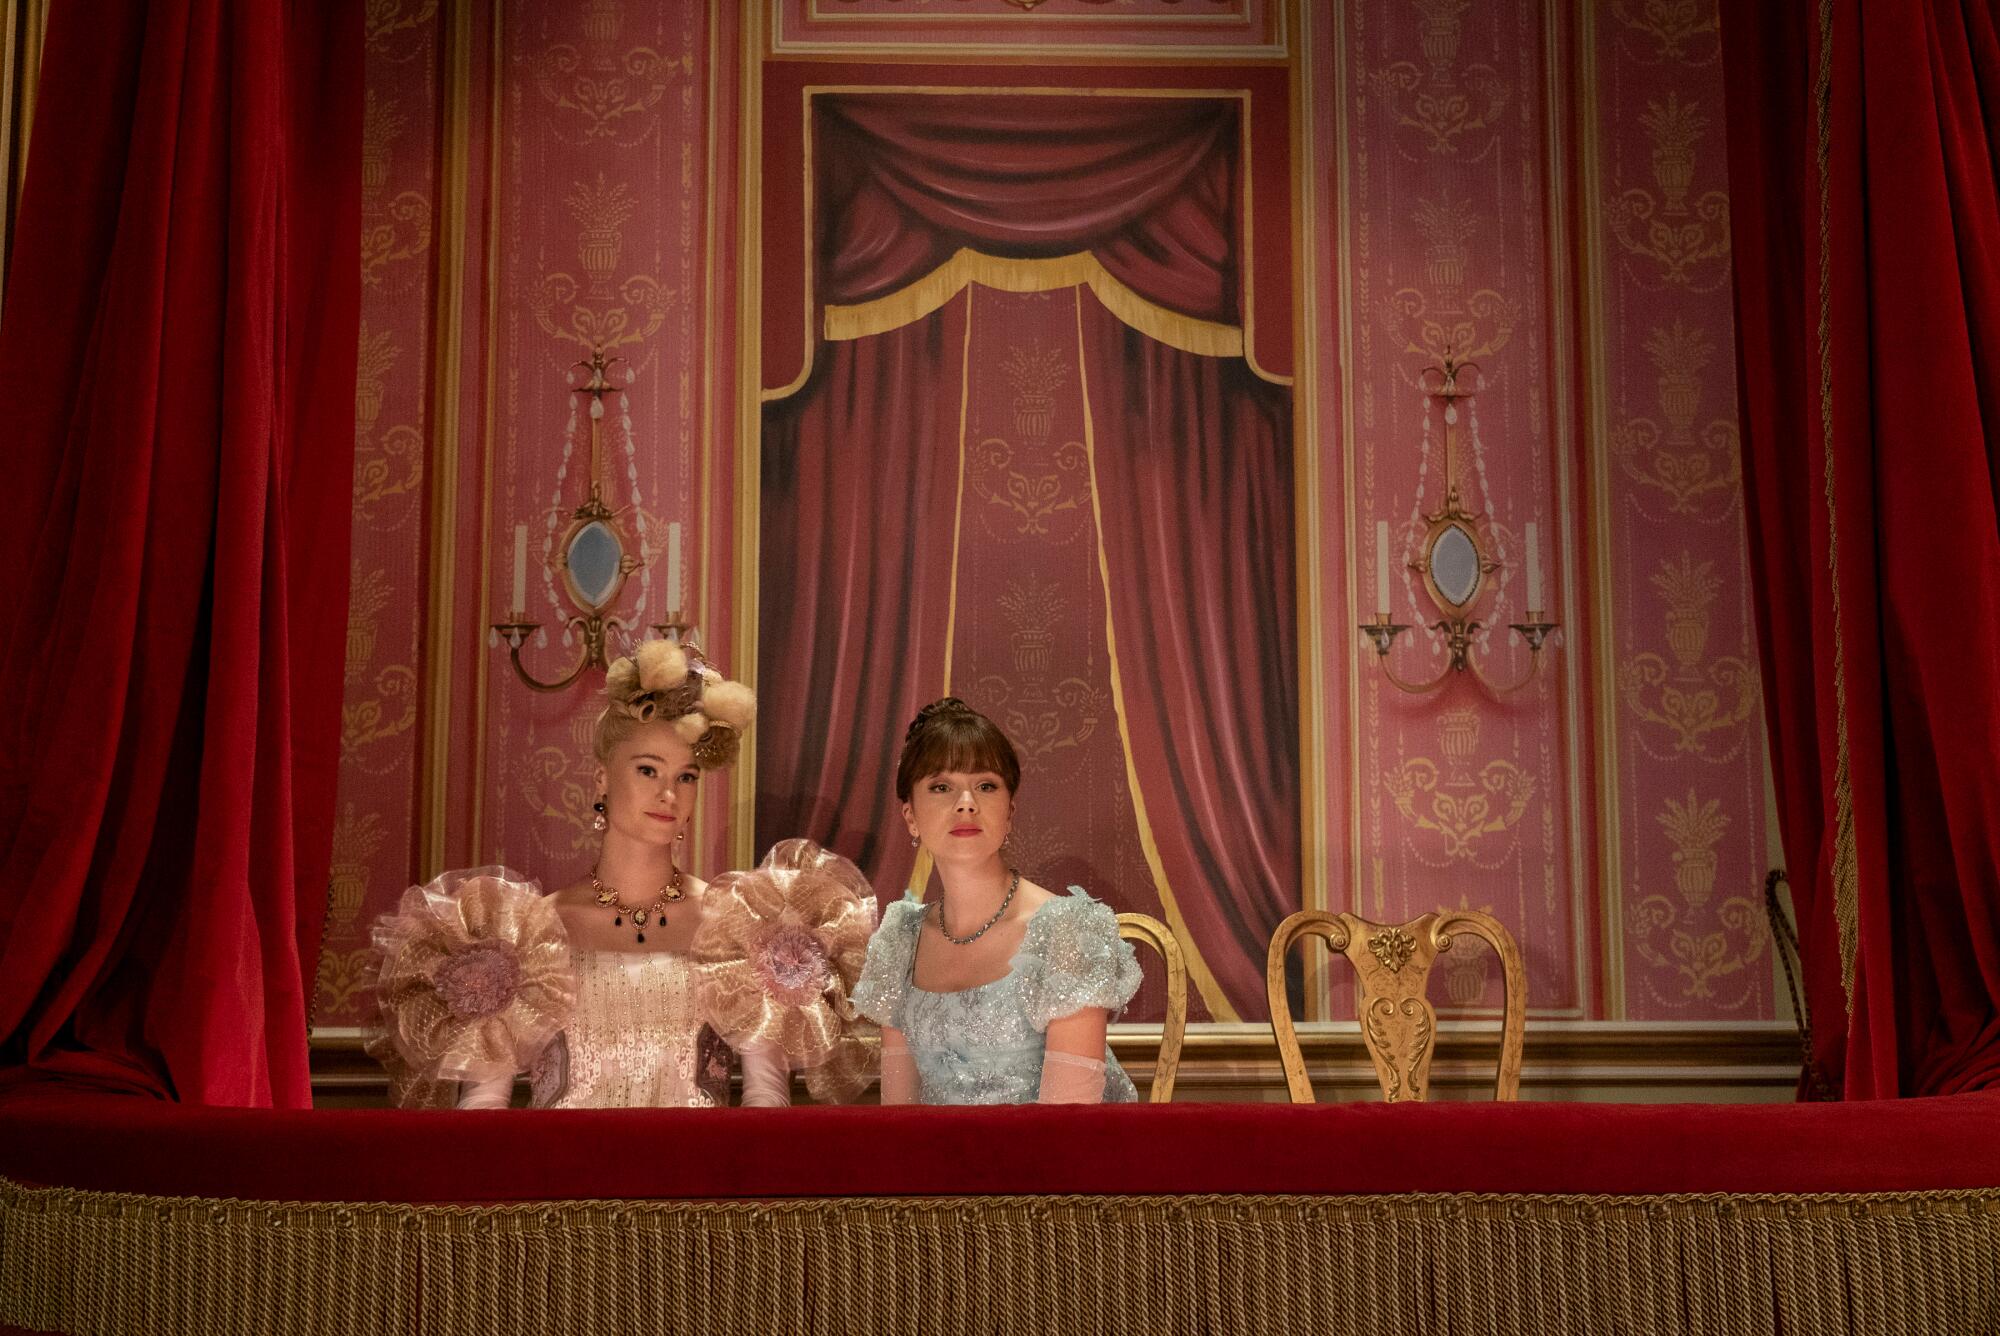 Two young women, wearing elaborate Regency-era dresses, sit in the balcony of a theater